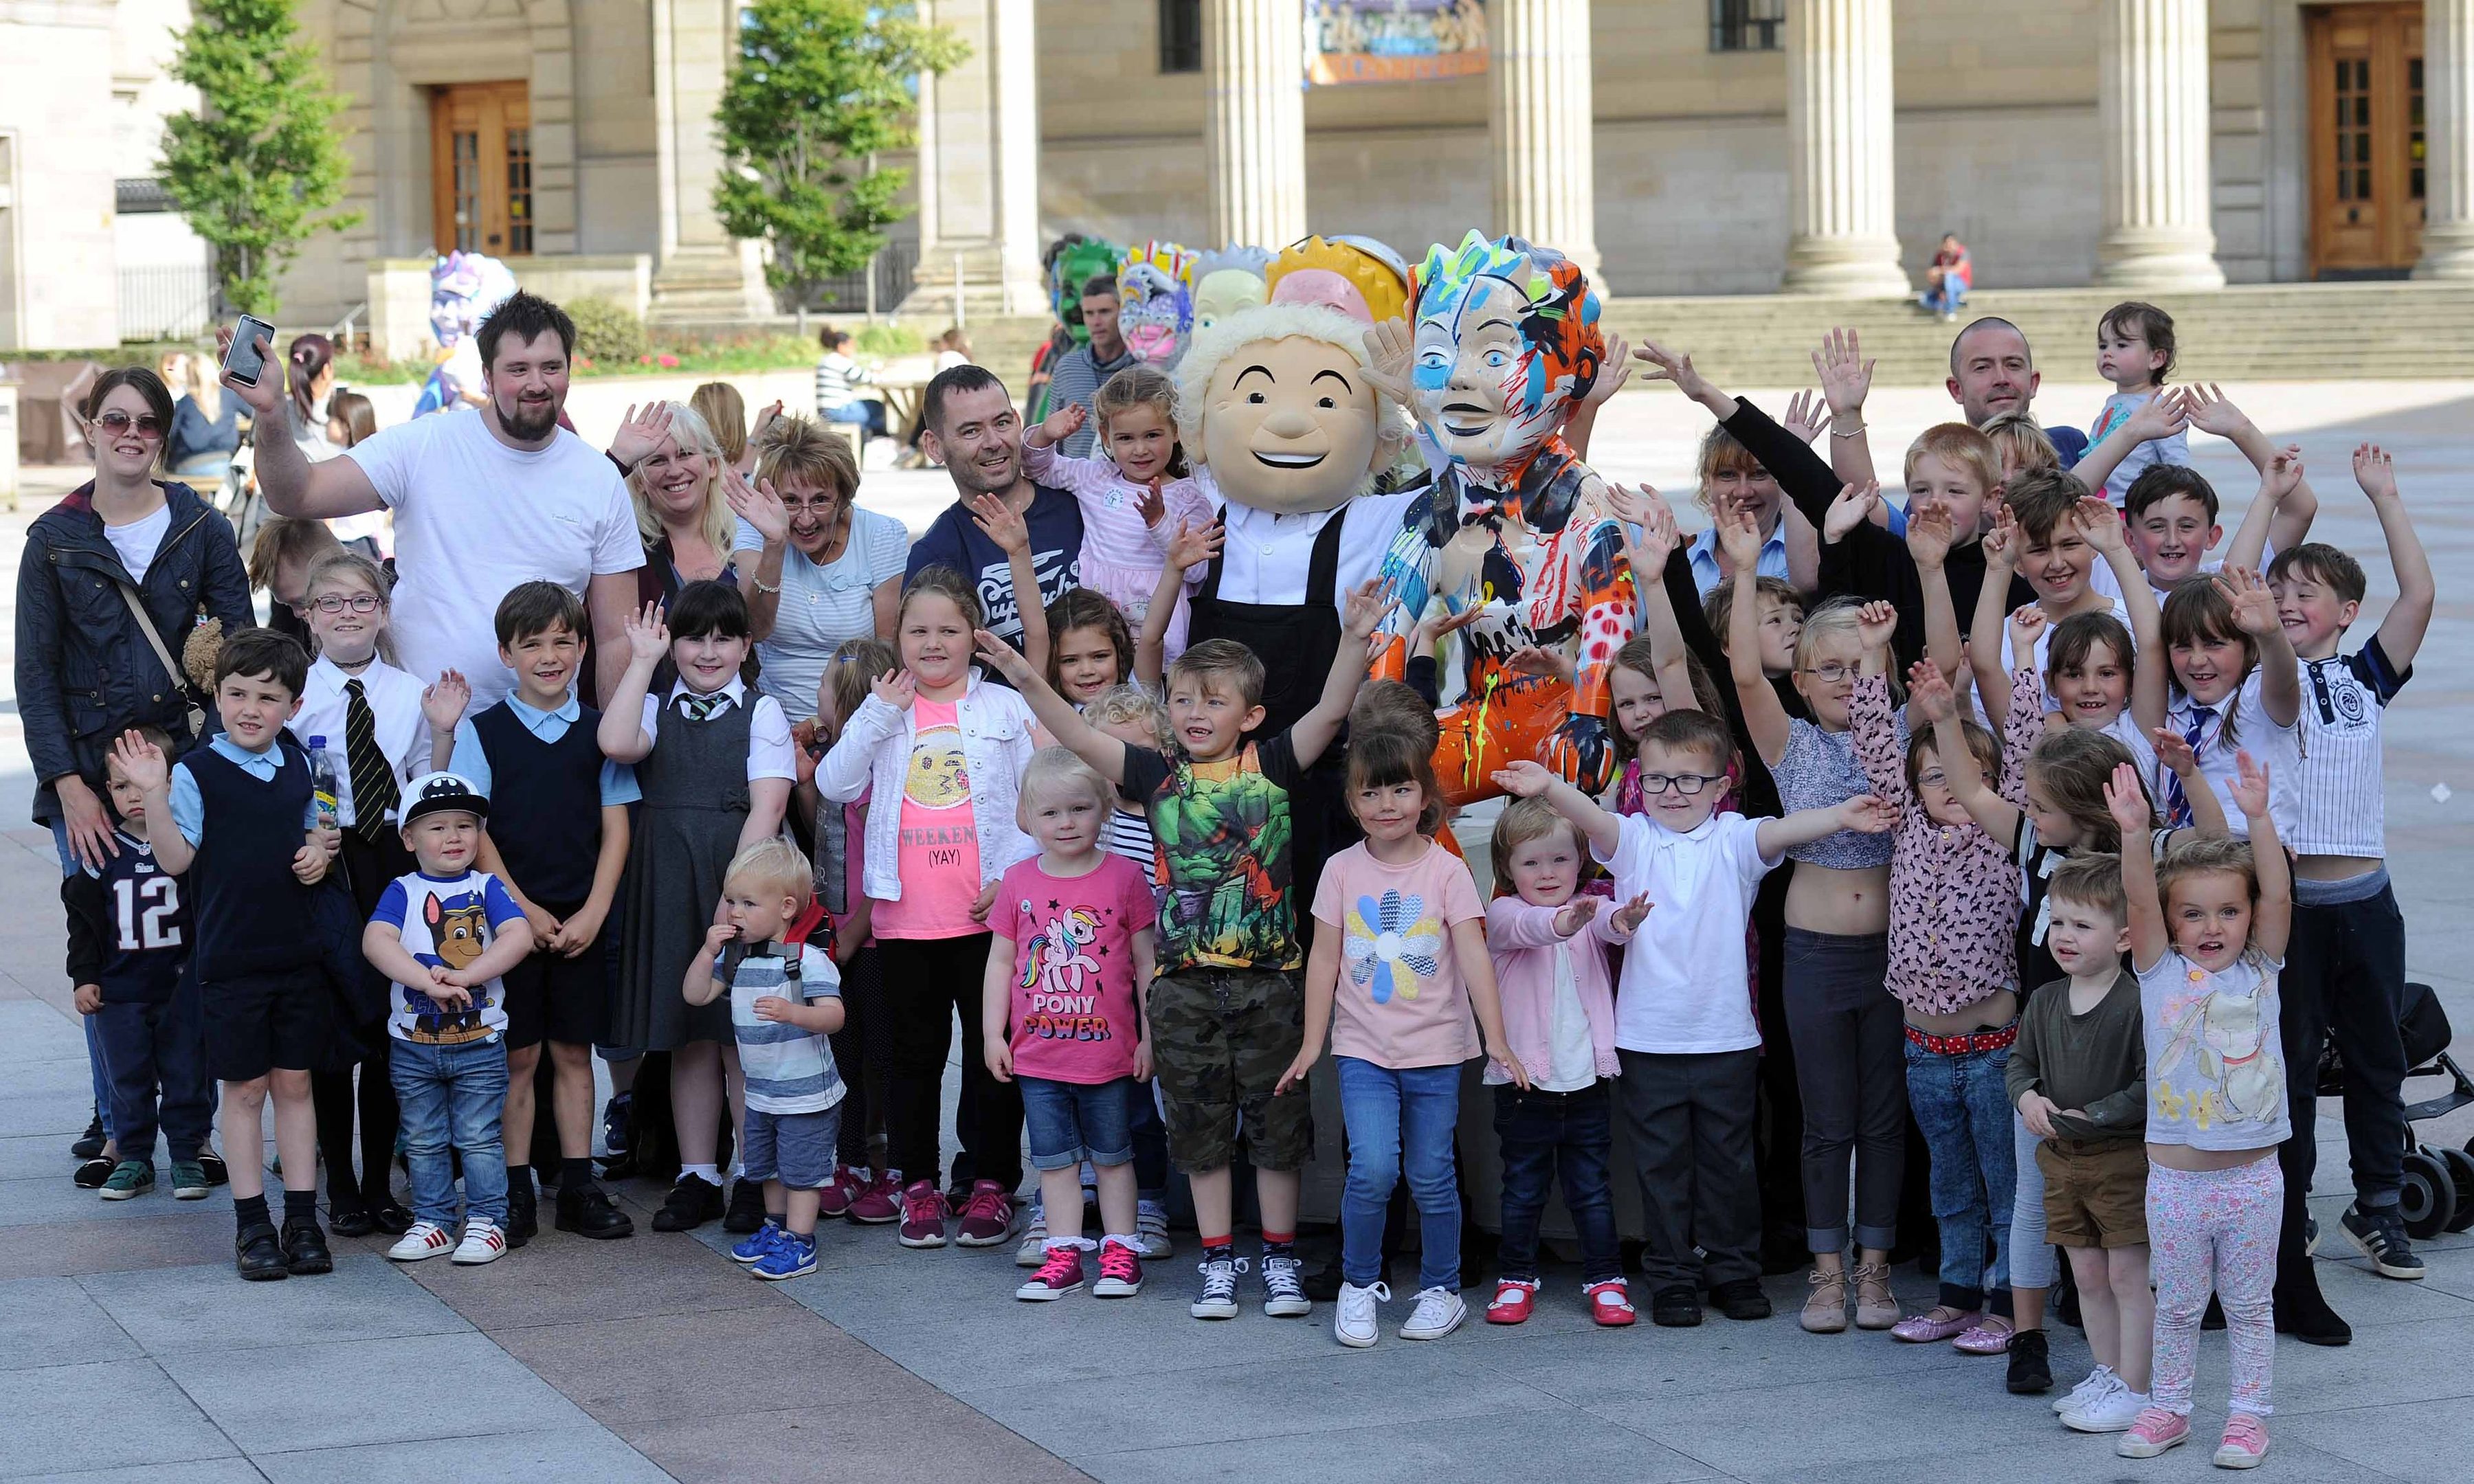 Youngsters thrilled by an appearance by Oor Wullie himself in Dundee City Square on Friday.